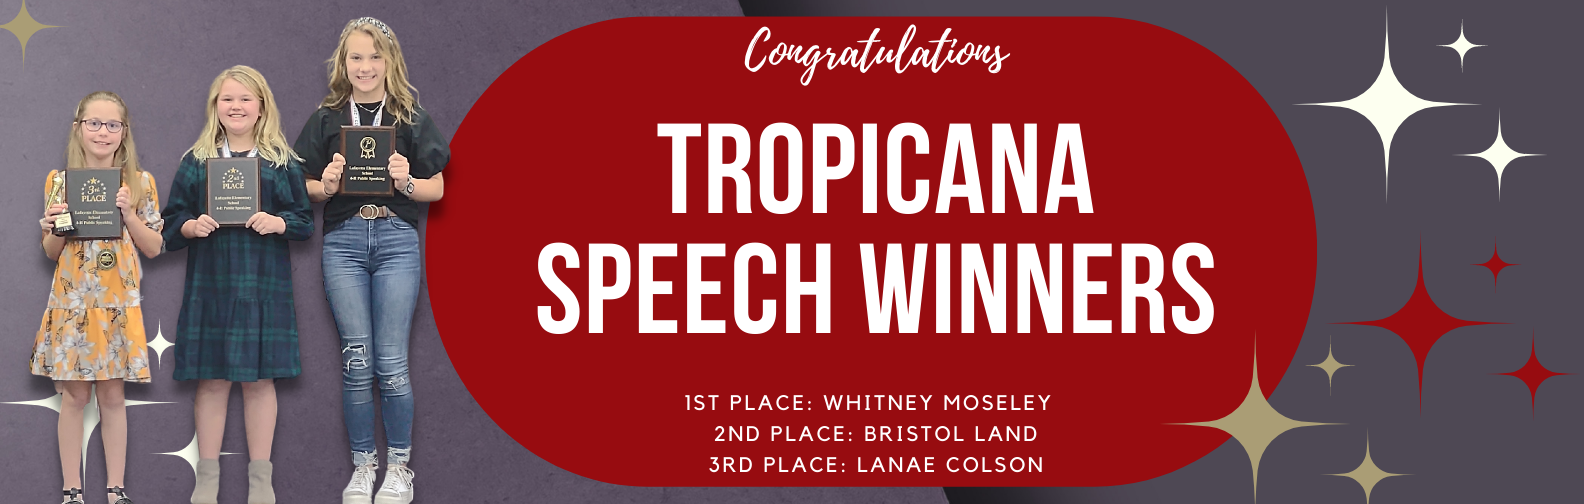 Congratulations Tropicana Speech Winners:  1st Place Whitney Moseley, 2nd Place: Bristol Land, 3rd Place: Lanae Colson